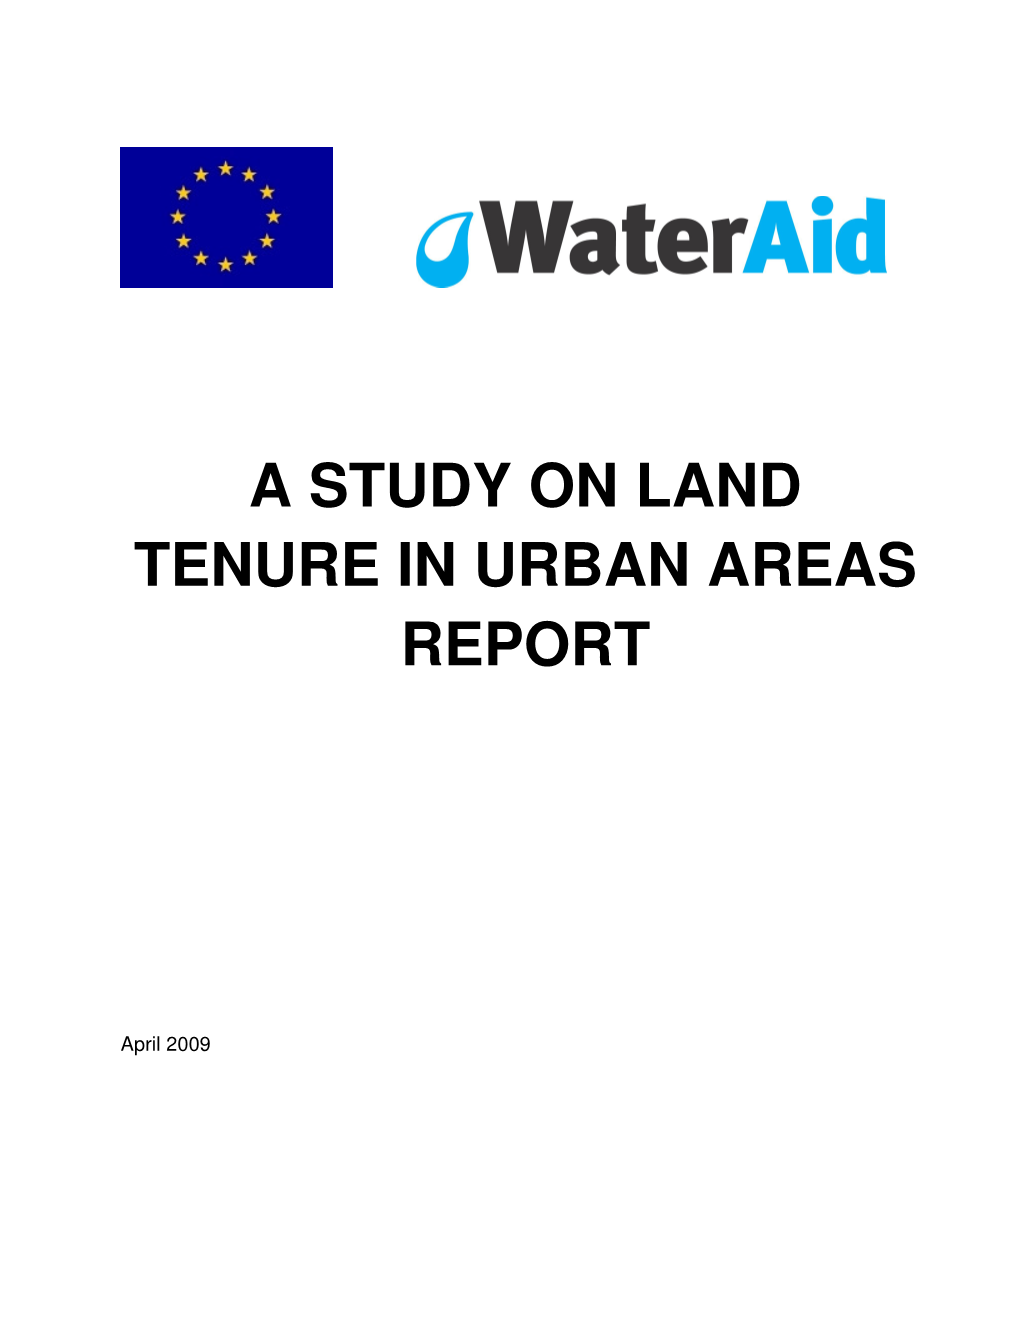 A Study on Land Tenure in Urban Areas Report